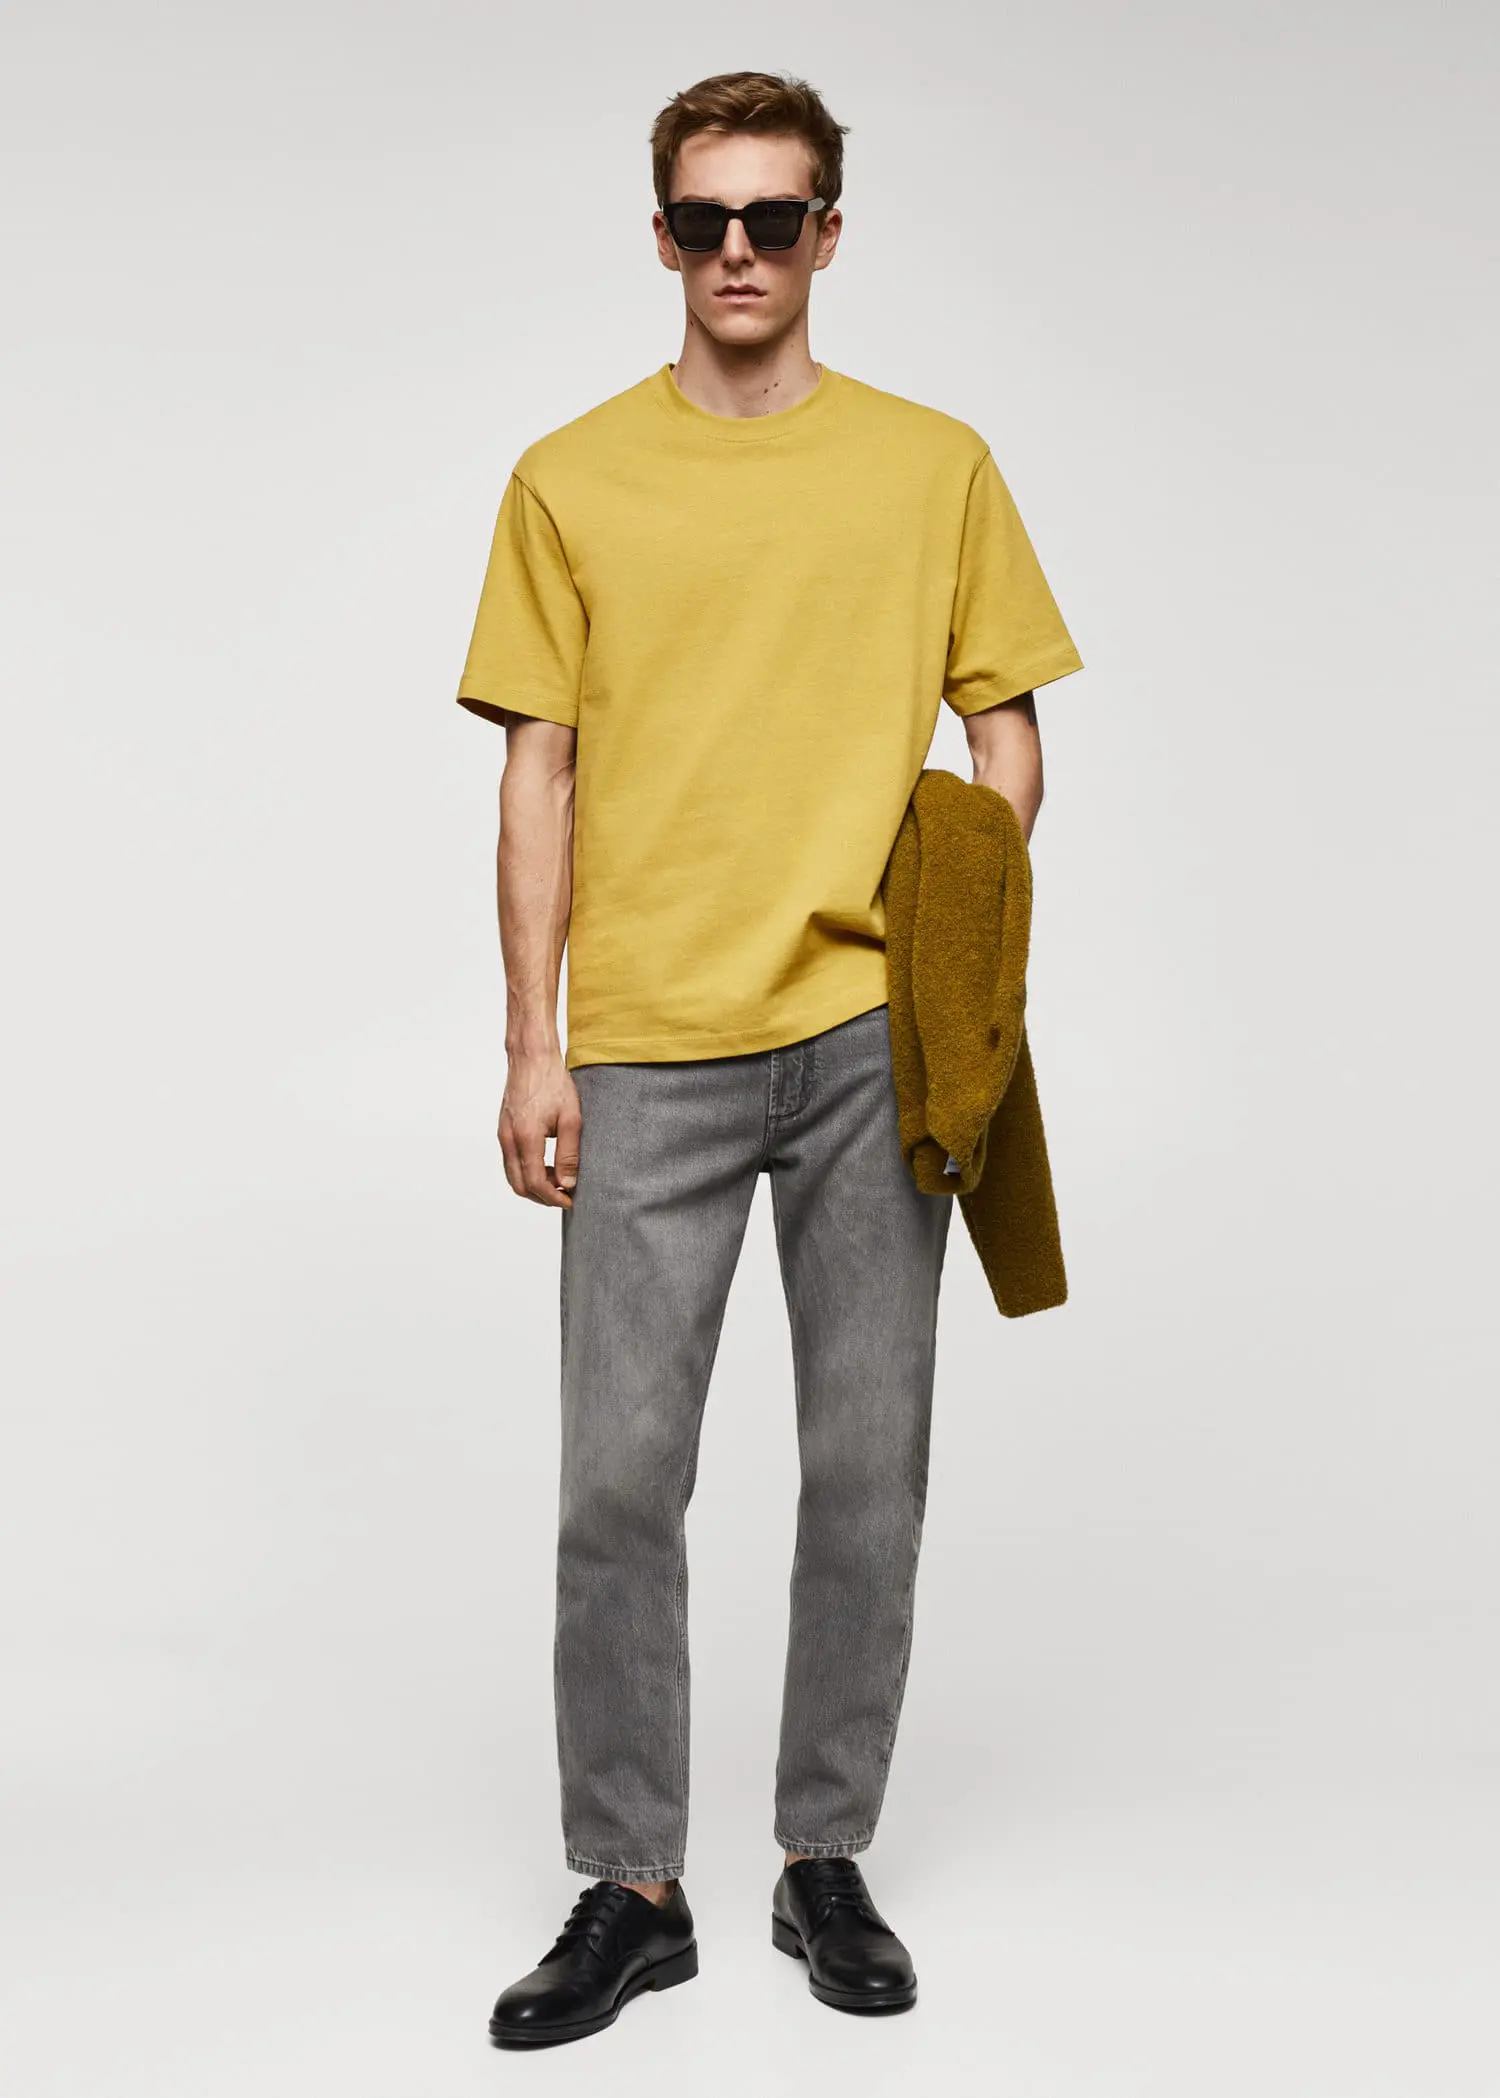 Mango Basic 100% cotton relaxed-fit t-shirt. 2